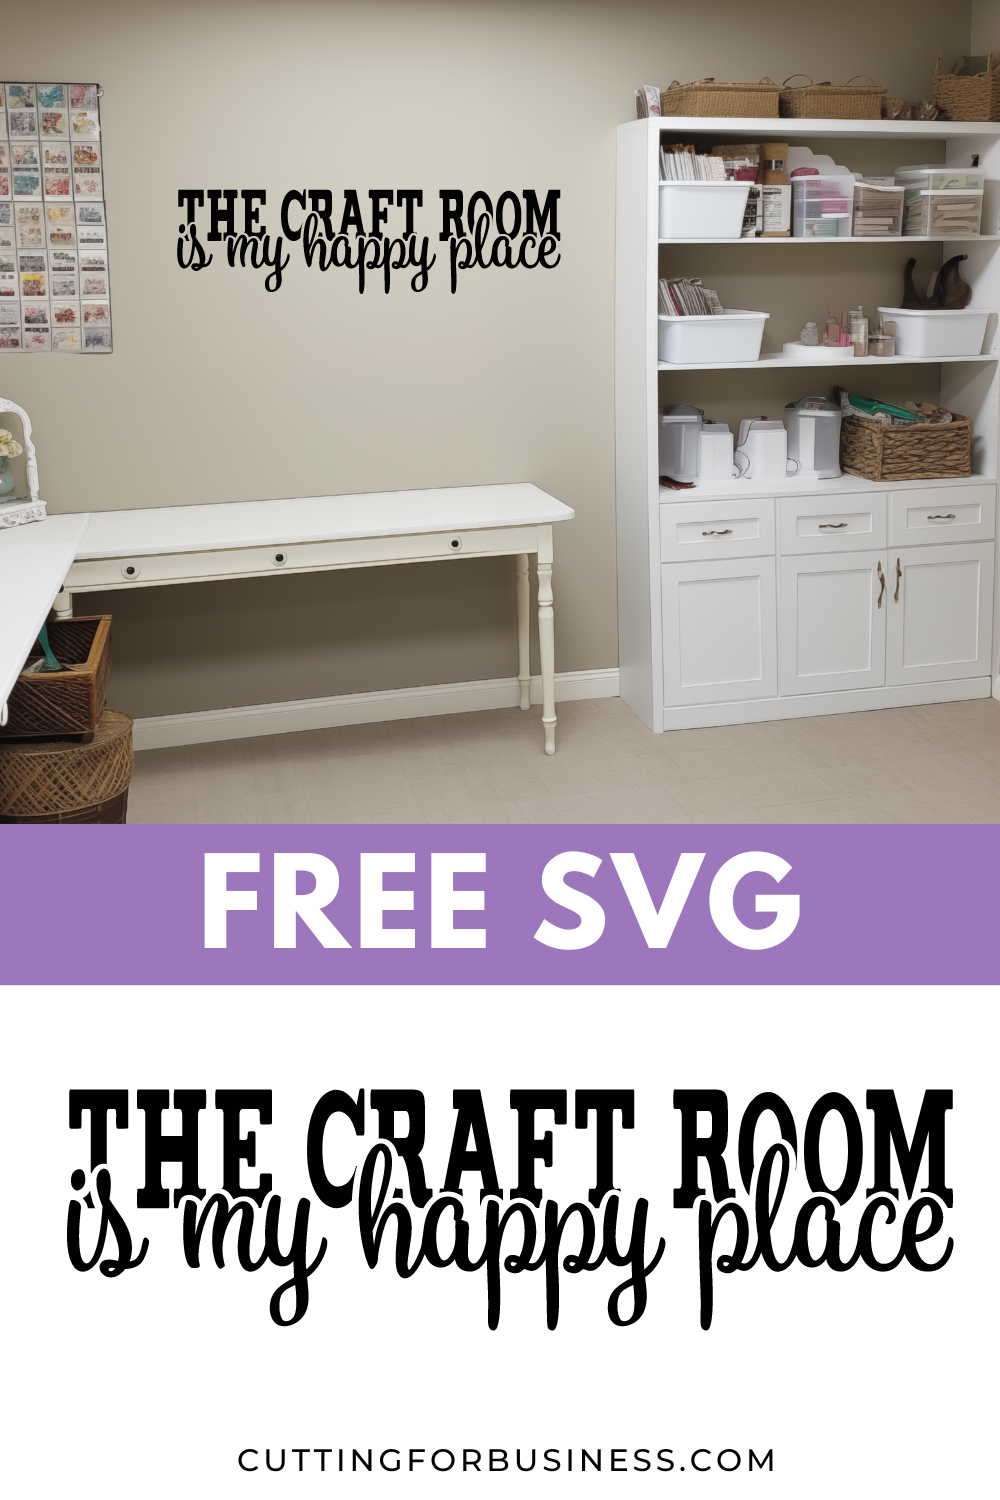 Free SVG - The Craft Room is My Happy Place - cuttingforbusiness.com